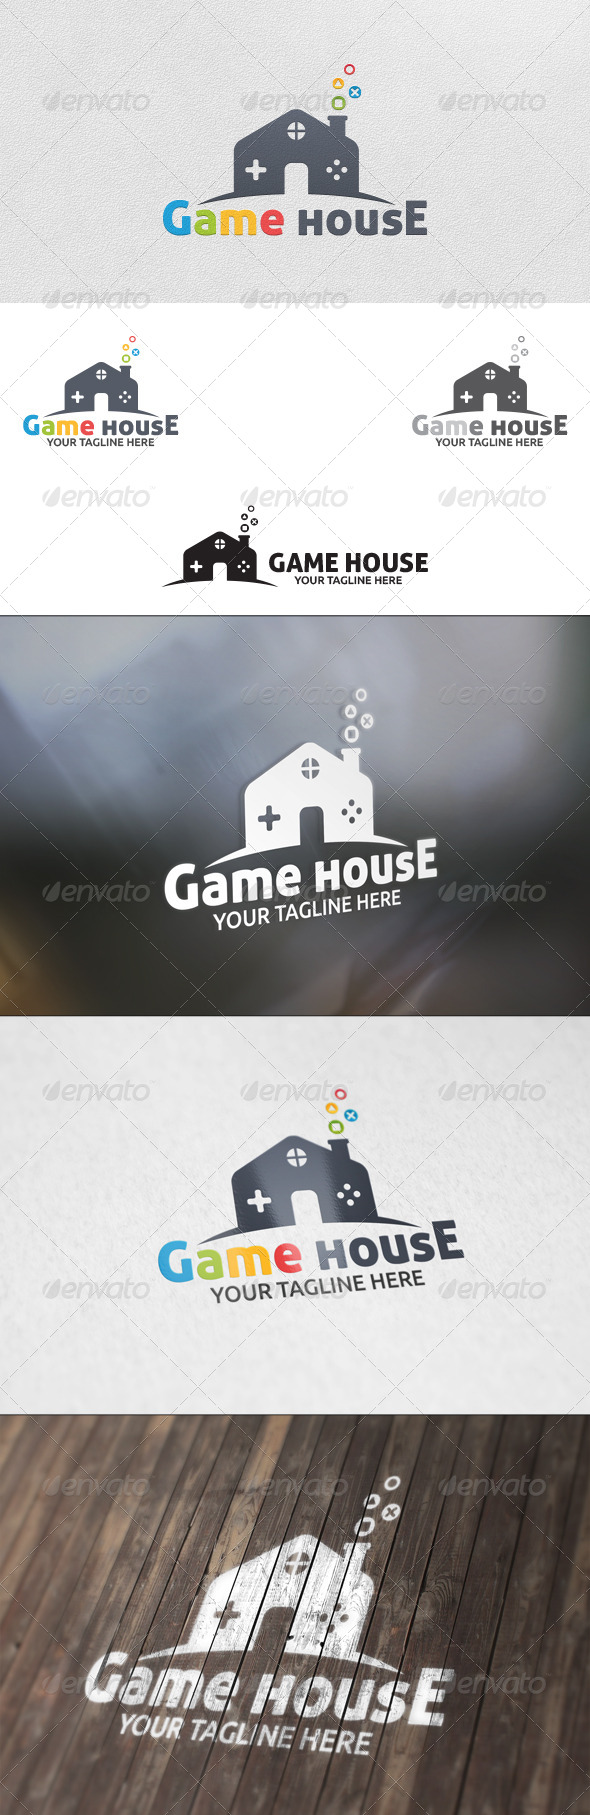 Game House - Logo Template